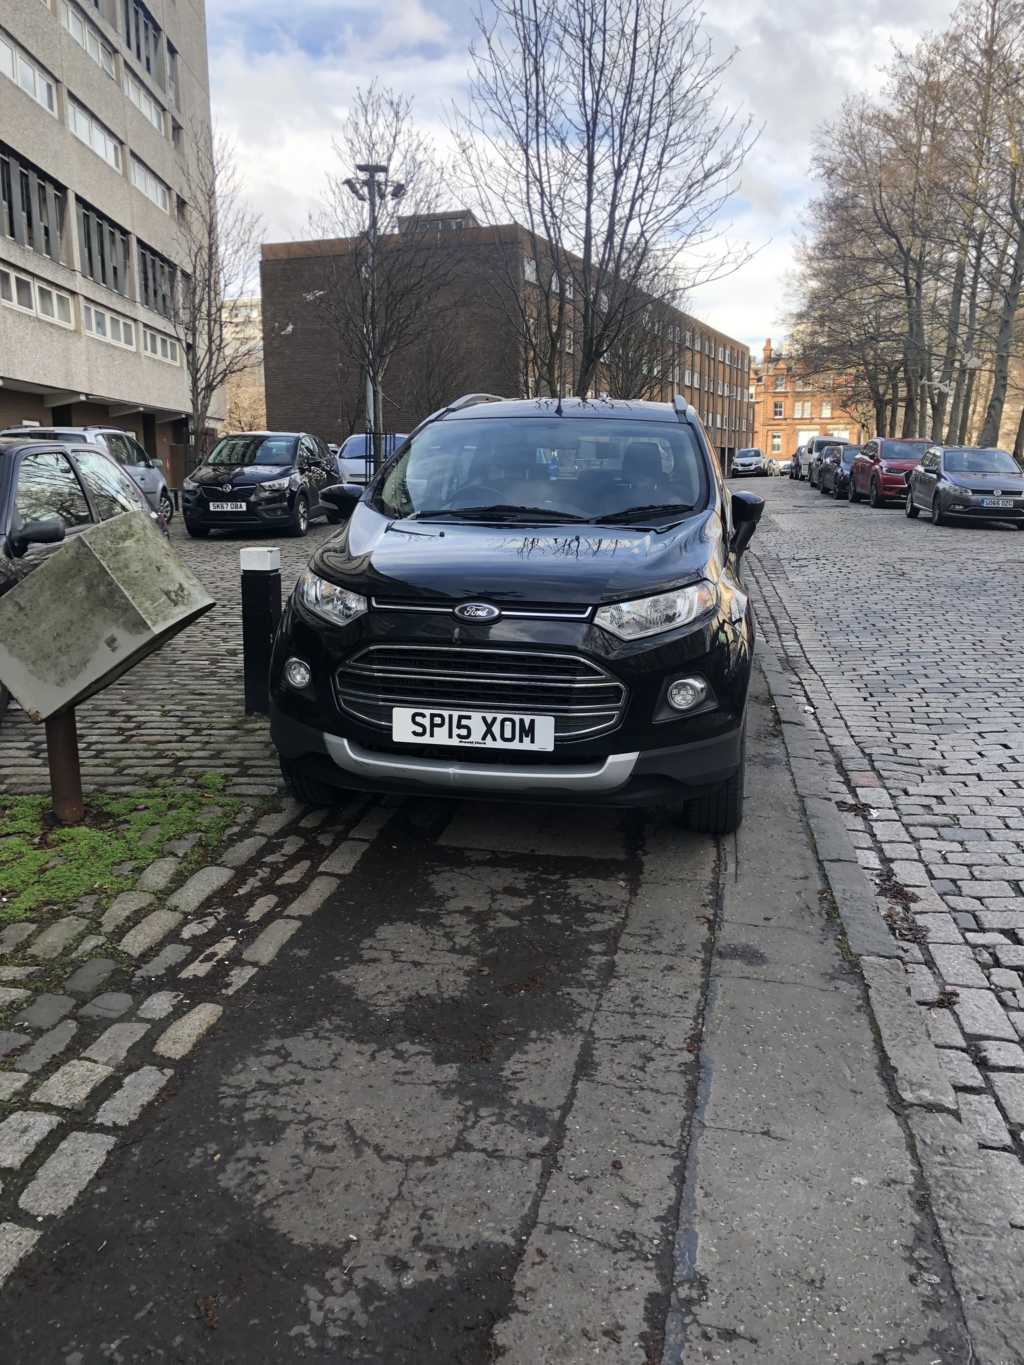 SP15 XOM is an Inconsiderate Parker